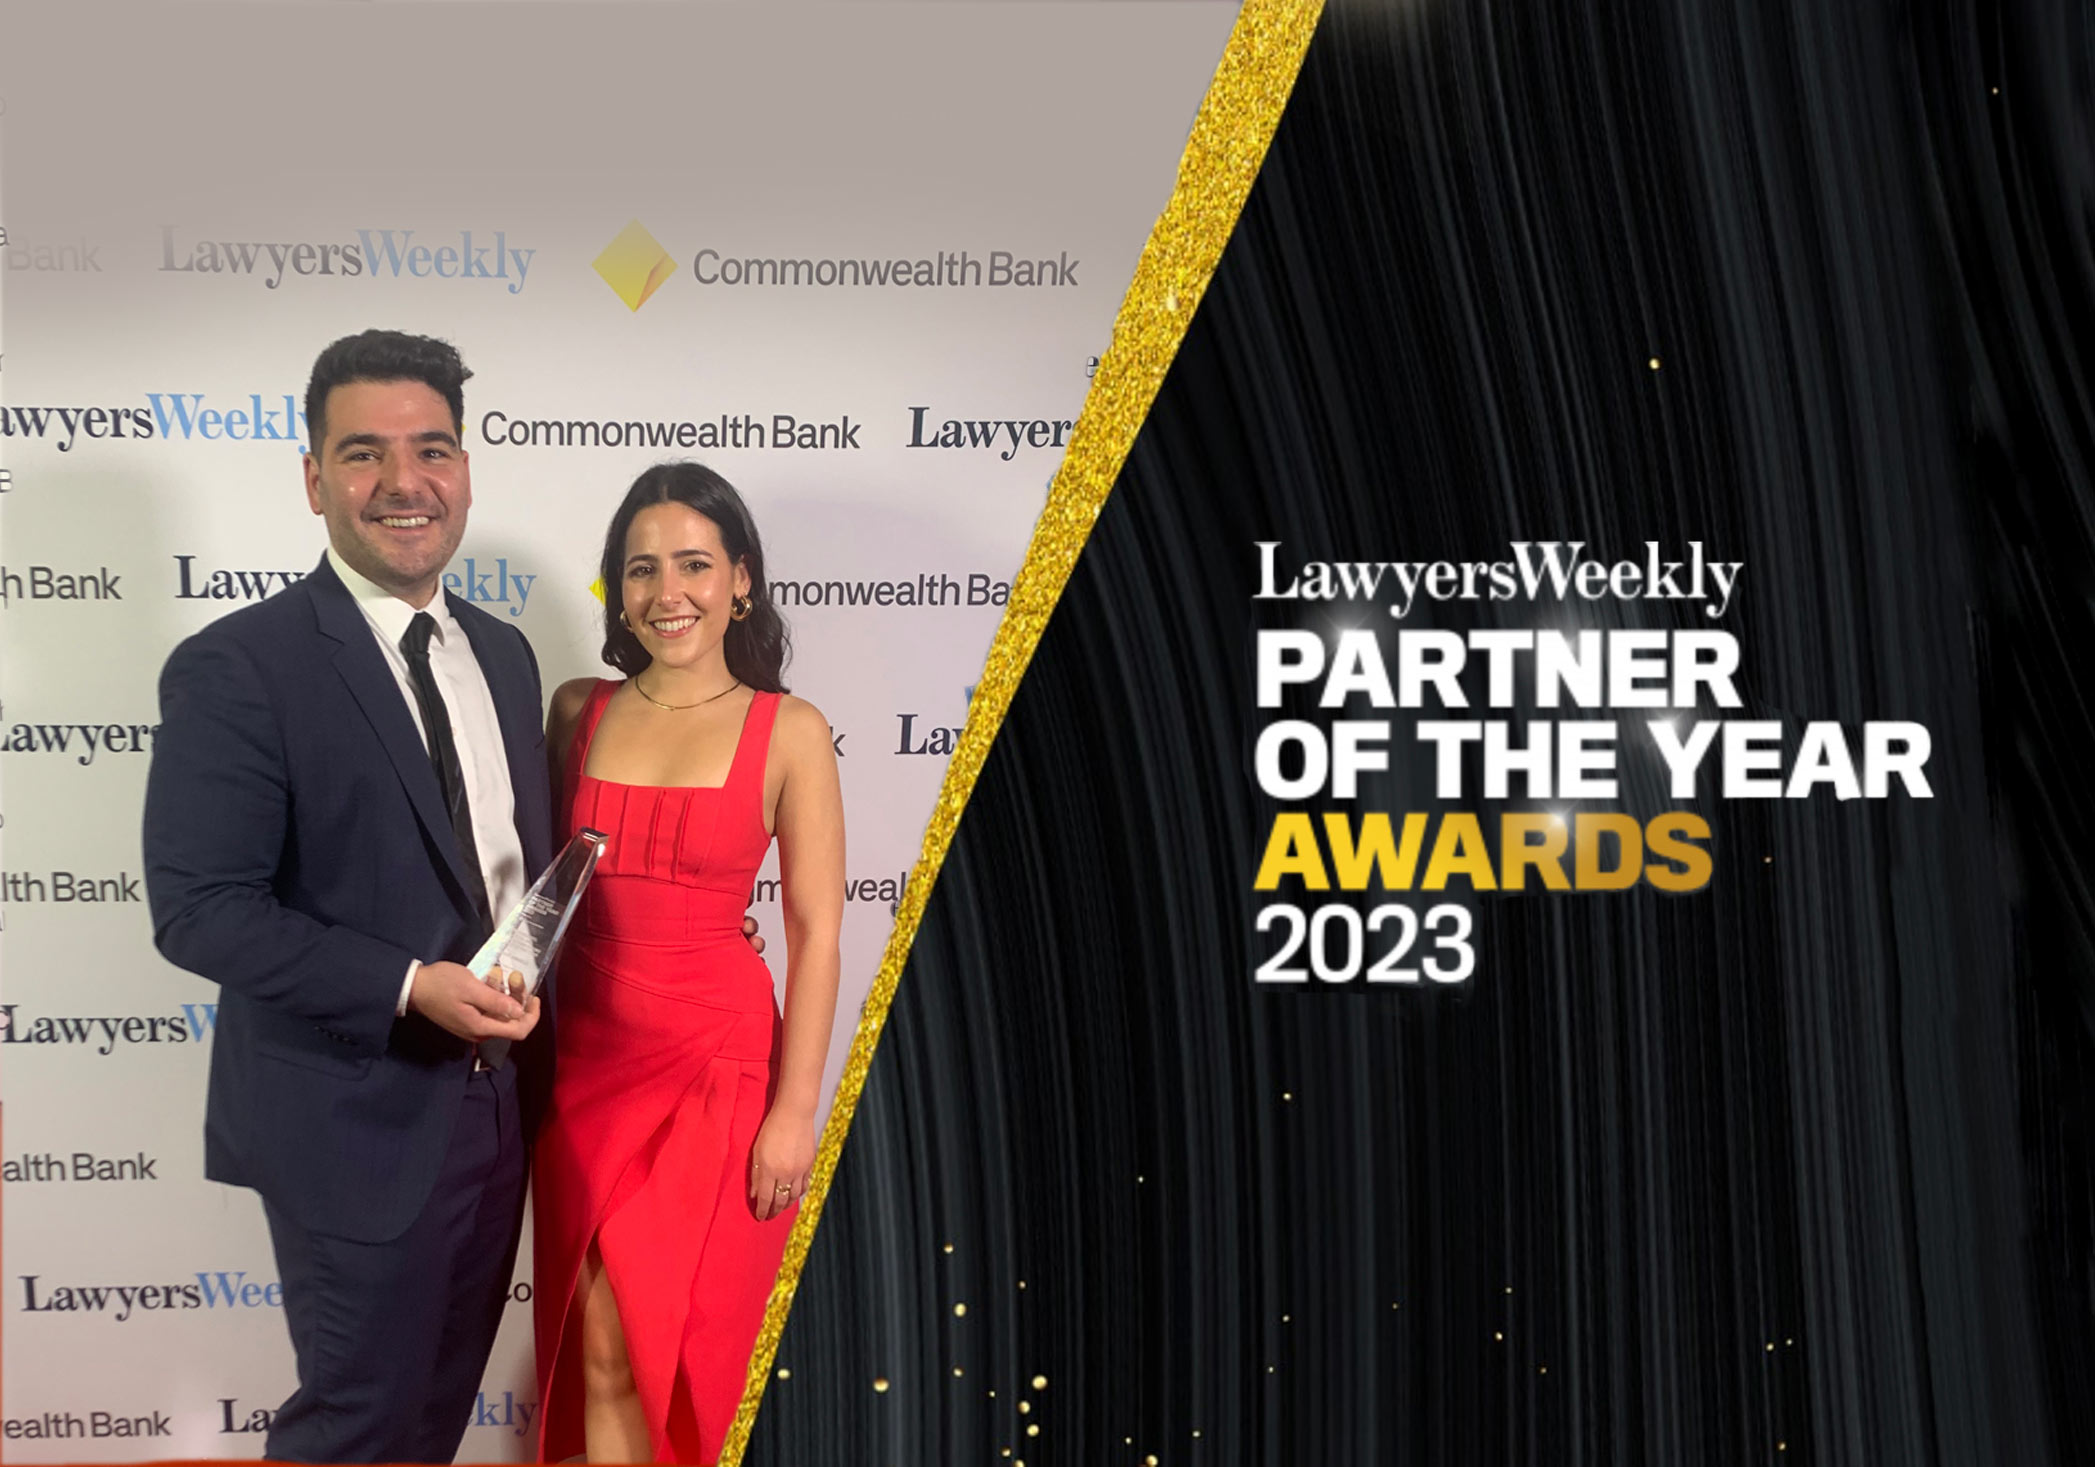 Marco Angele named Partner of the Year in the 2023 Lawyers Weekly Partner Awards